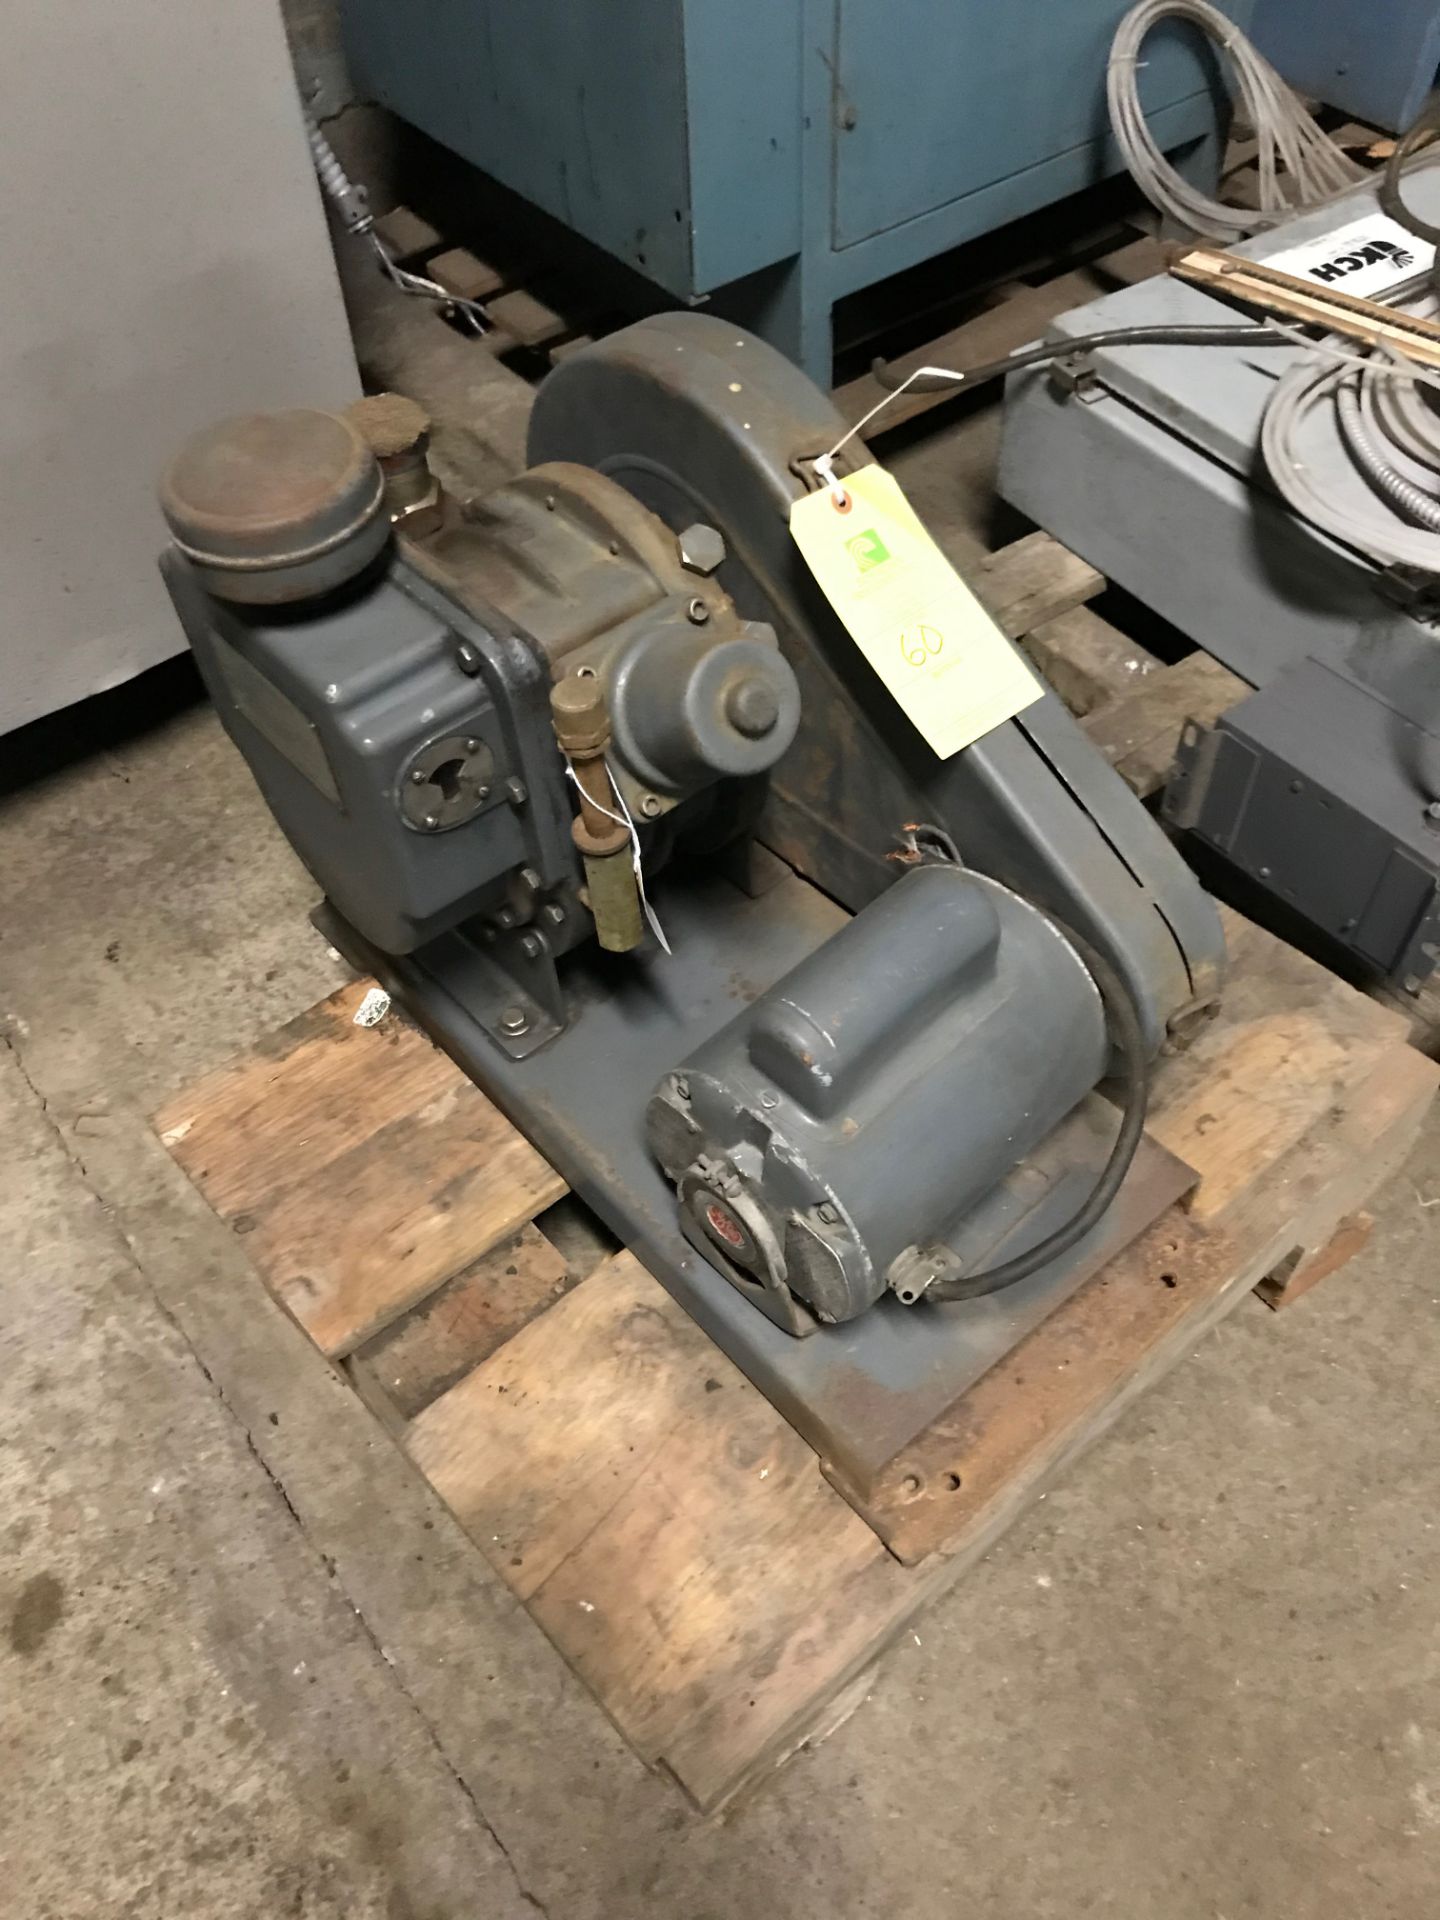 DUO SEAL VACCUUM PUMP, WELCH SCIENTIFIC CO, MODEL 5K647RG795X, 1 PHASE, 1 HP, CYCLES 60, RPM 1725, - Image 2 of 4